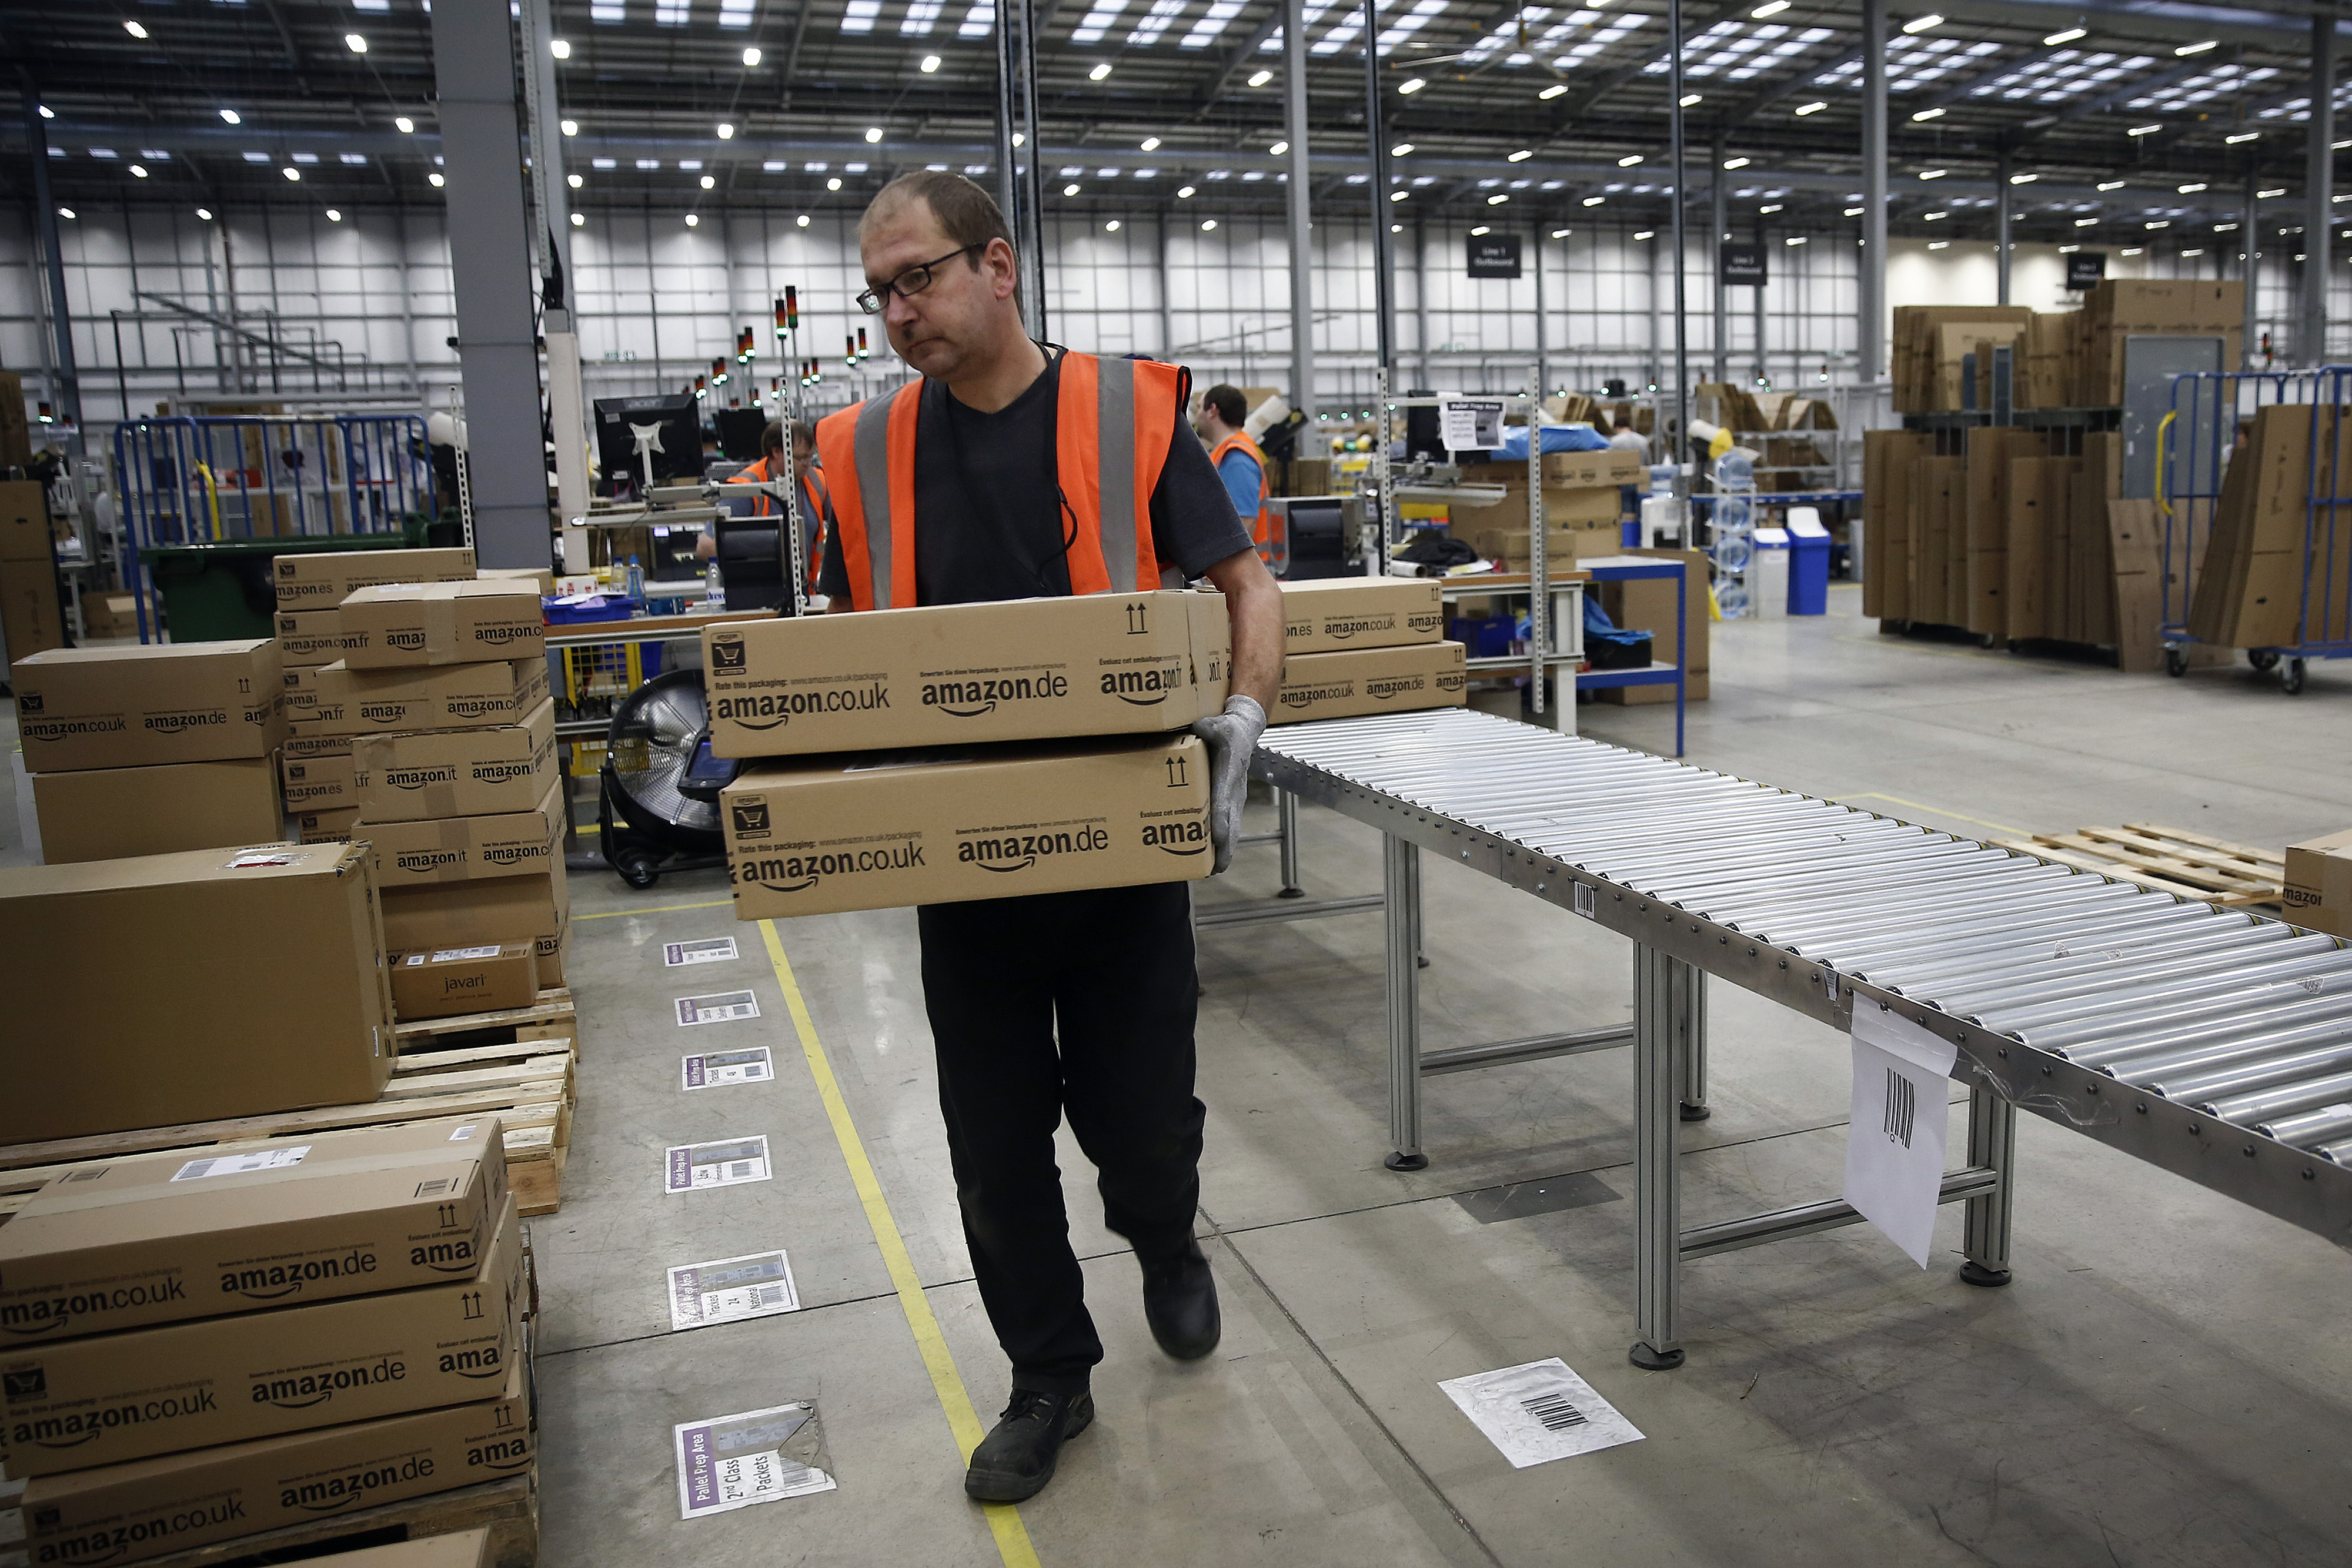 Amazon Prime Price Hike Could Be a Major Mistake